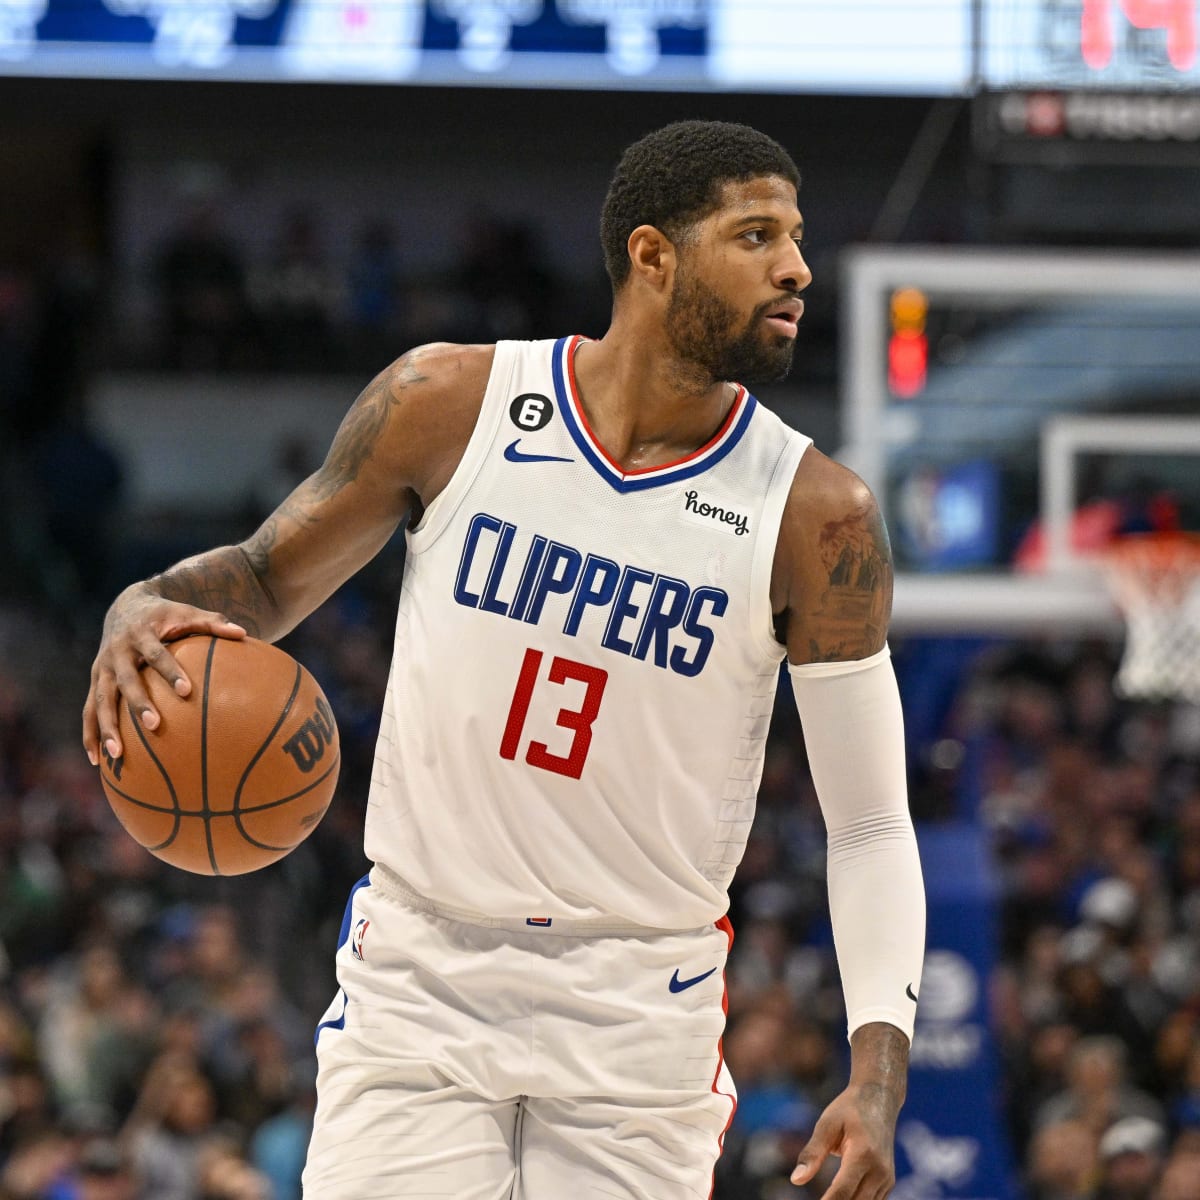 Report: Paul George sustained sprained right knee, Clippers to